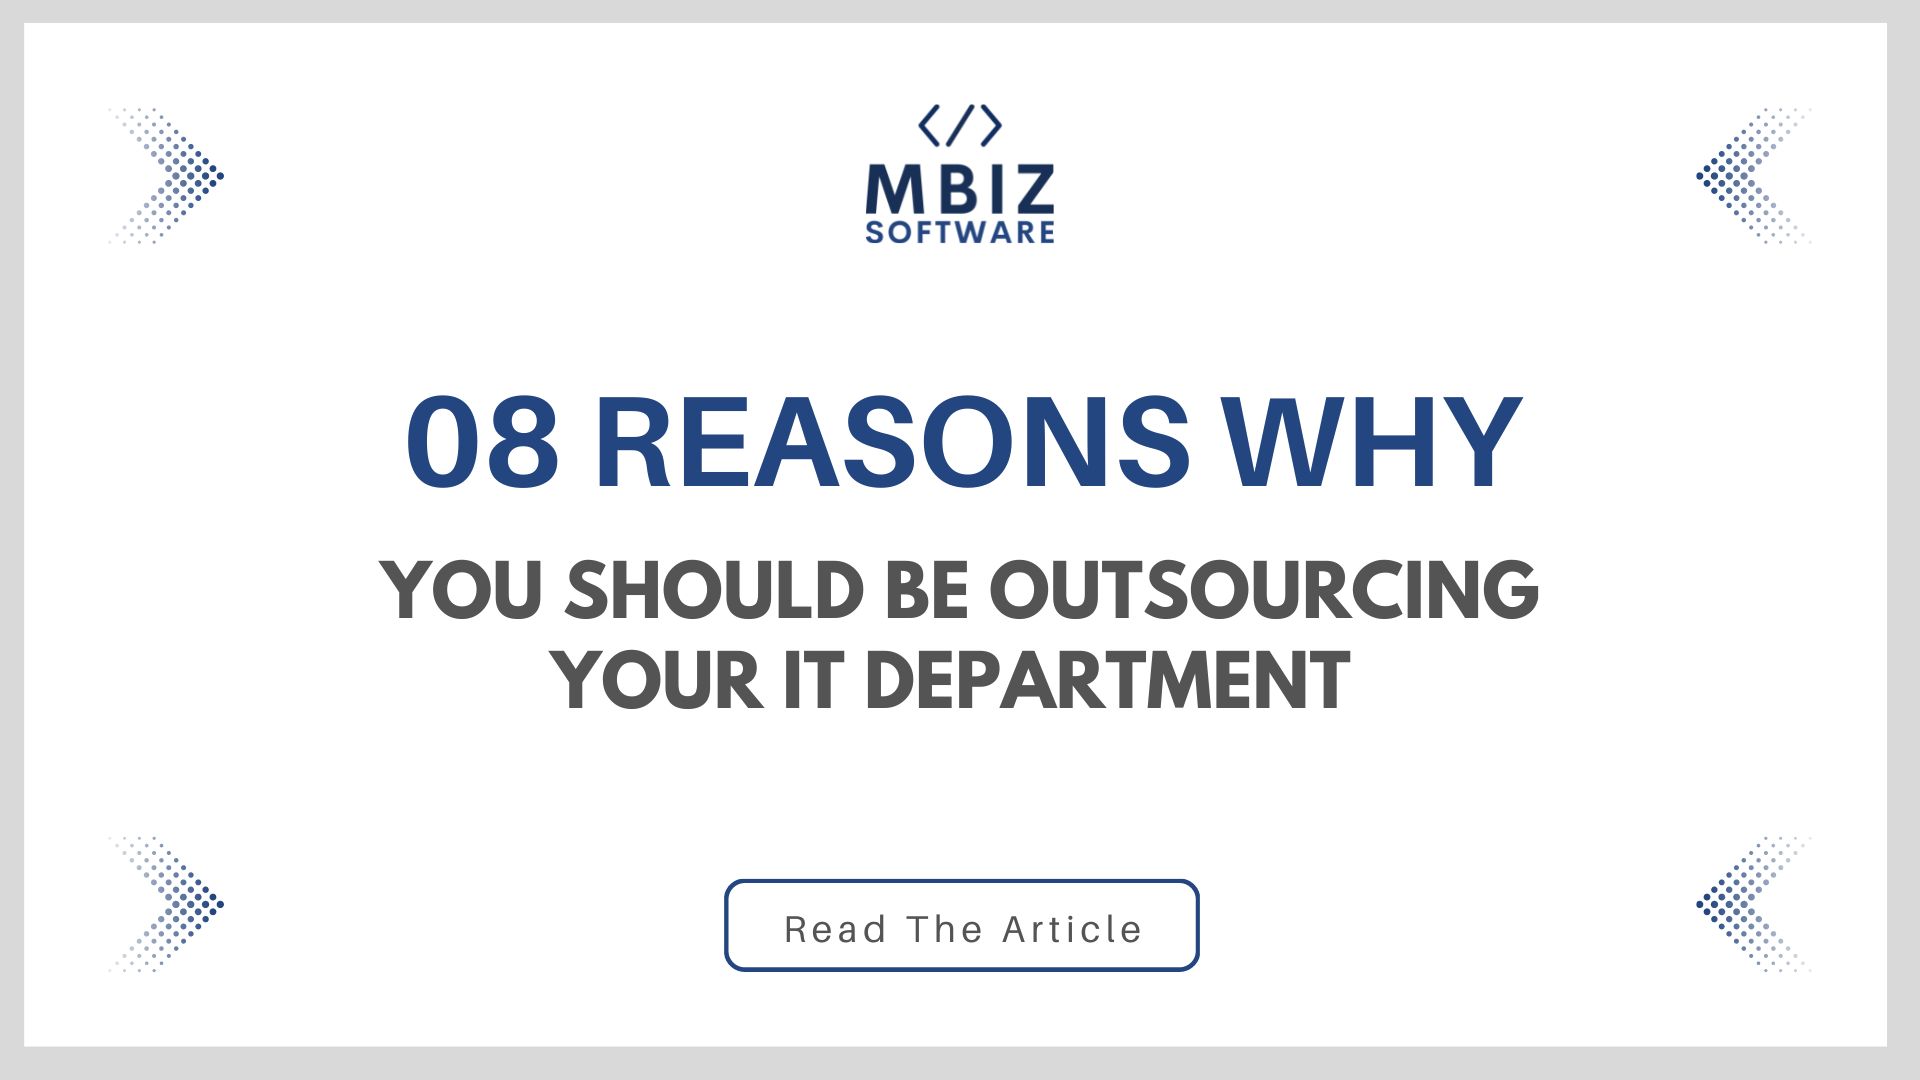 Outsource my IT department